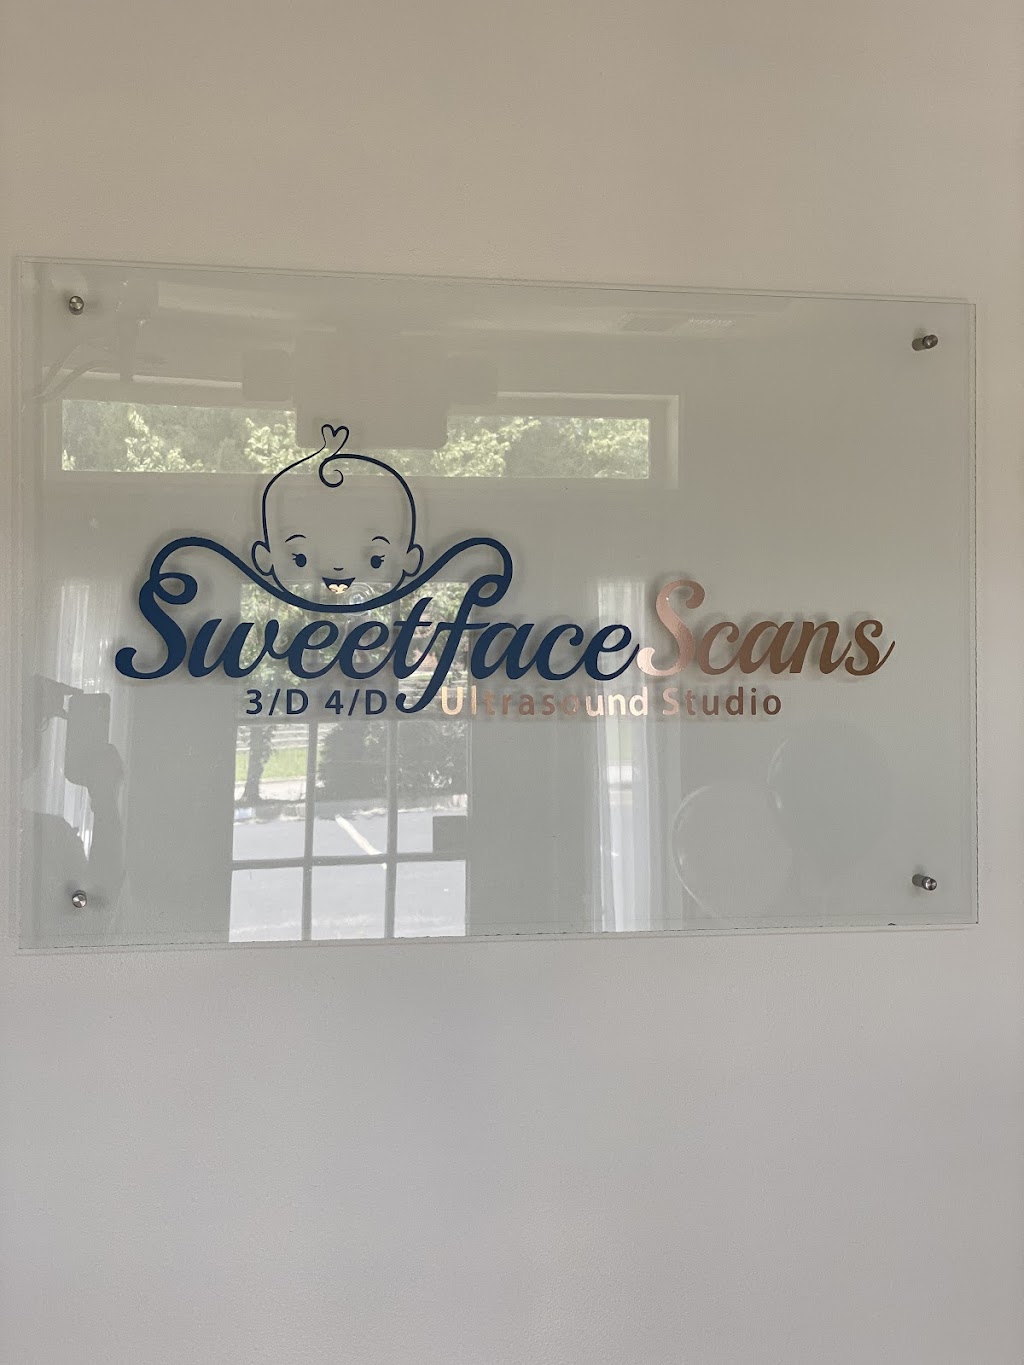 Sweetface Scans 3D/4D Ultrasound & Body Spa | 44 Darbys Crossing Dr Suite 112, Hiram, GA 30141 | Phone: (678) 398-7218